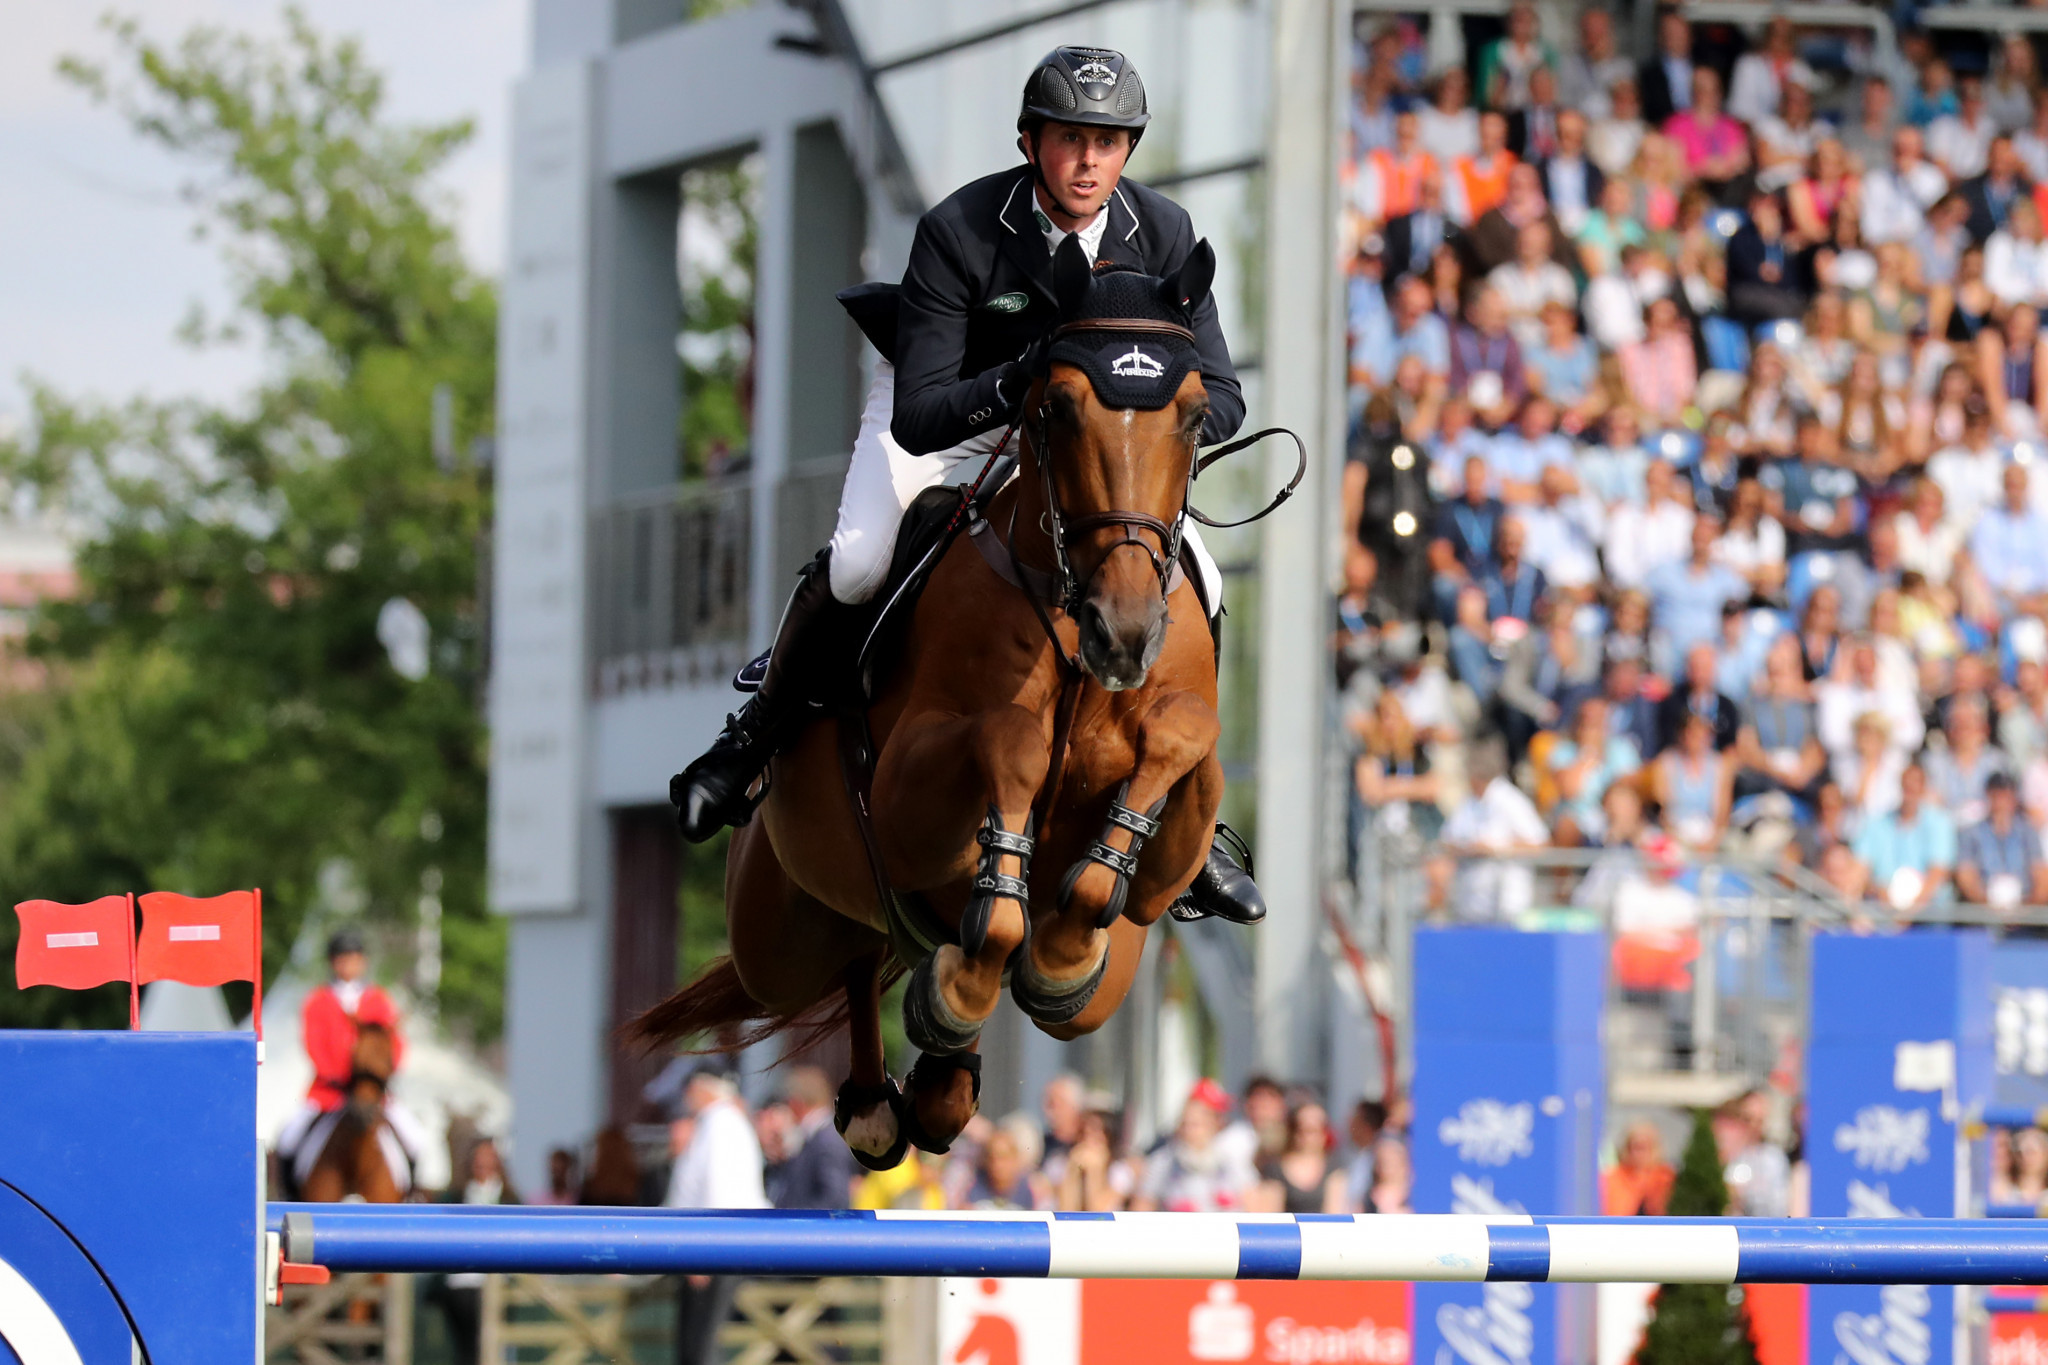 Britain's Ben Maher will be eyeing home victory at the Global Champions Tour event in London ©Getty Images